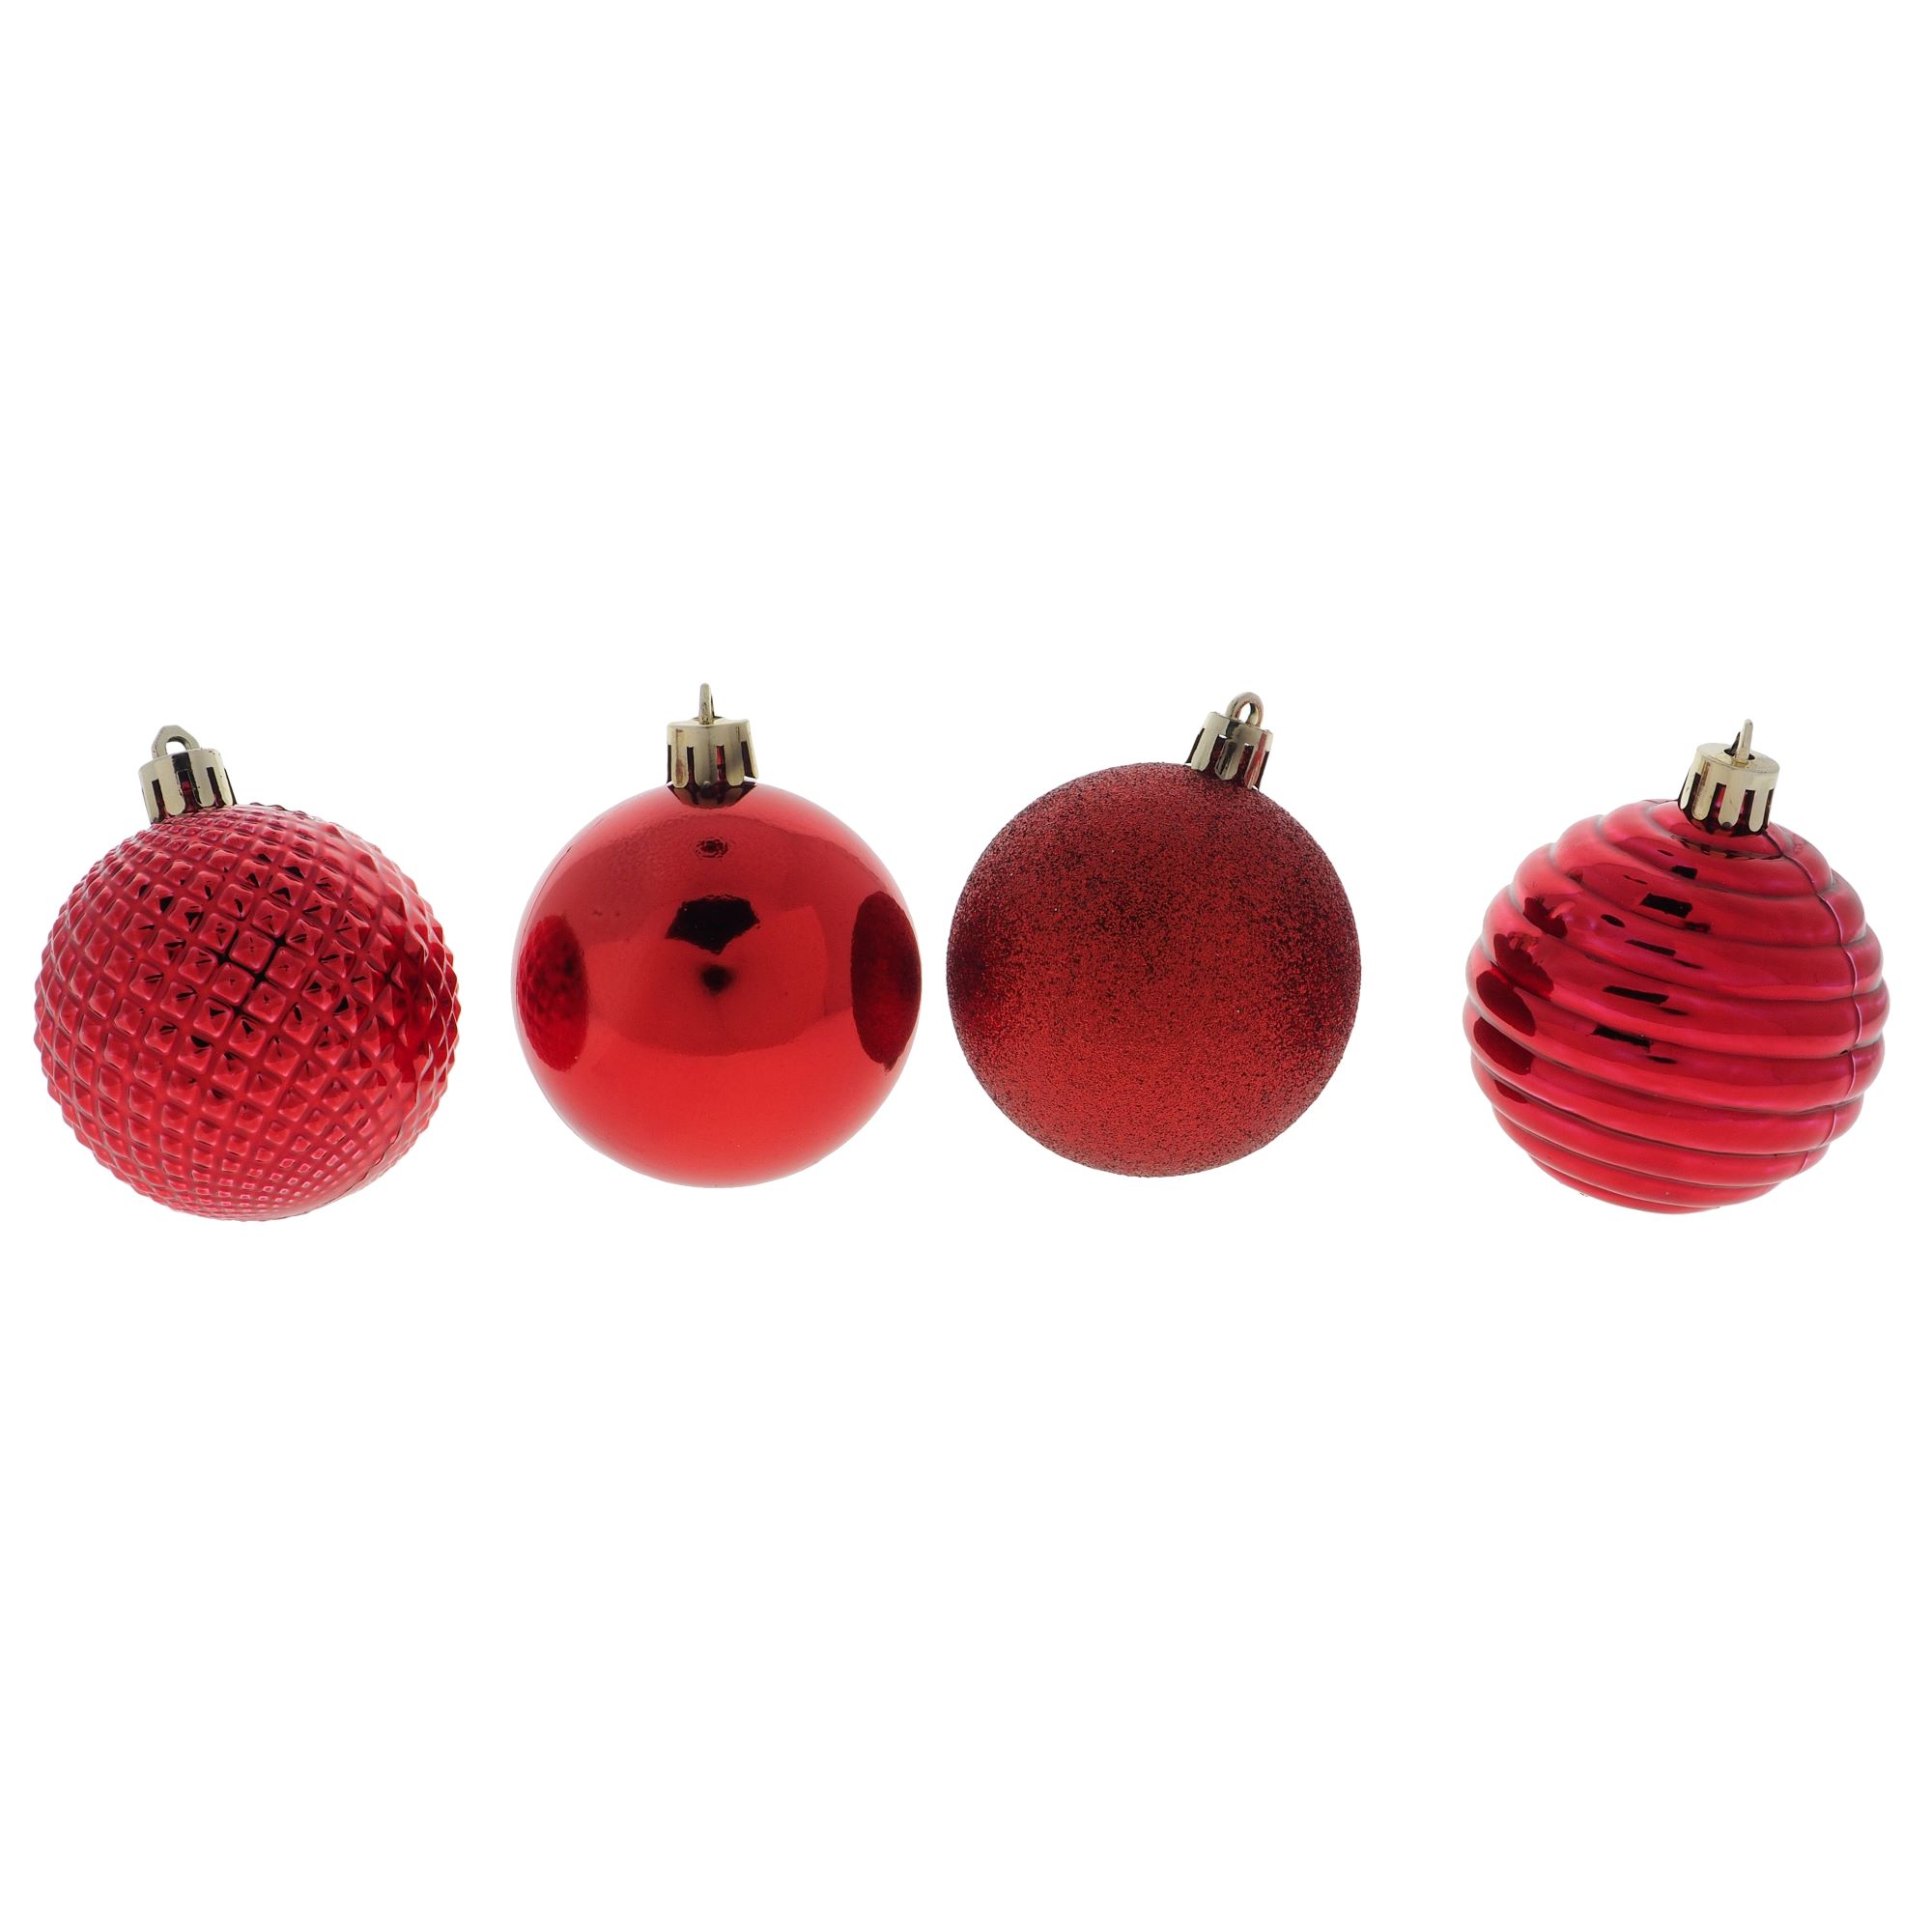 6Pk Red Non-Breakable Tree balls - Case of 24